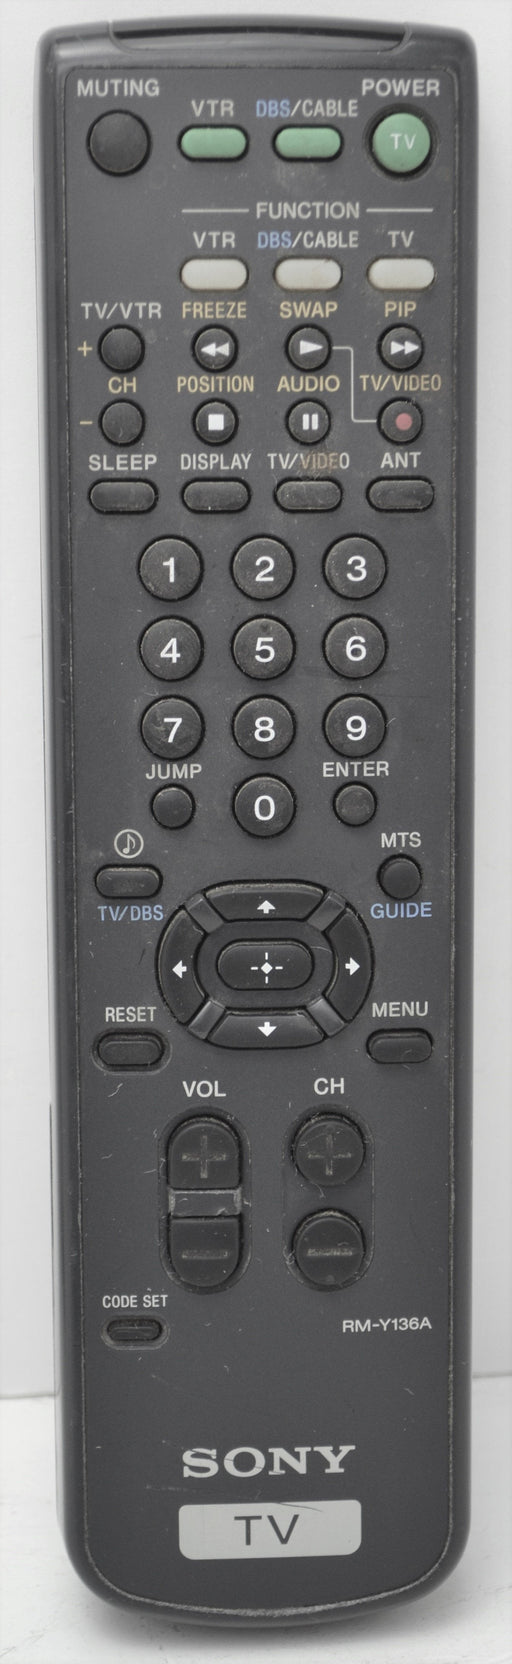 Sony RM-Y136A Audio / Video and TV Remote Control KV32XVBR250
KV36BR250
KV36FV2
KV36VBR250
KV36XBR250
KV36XBRR250
KV36XR450
KV38FX250
KV40XB700
KZ36XBR250-Remote-SpenCertified-refurbished-vintage-electonics